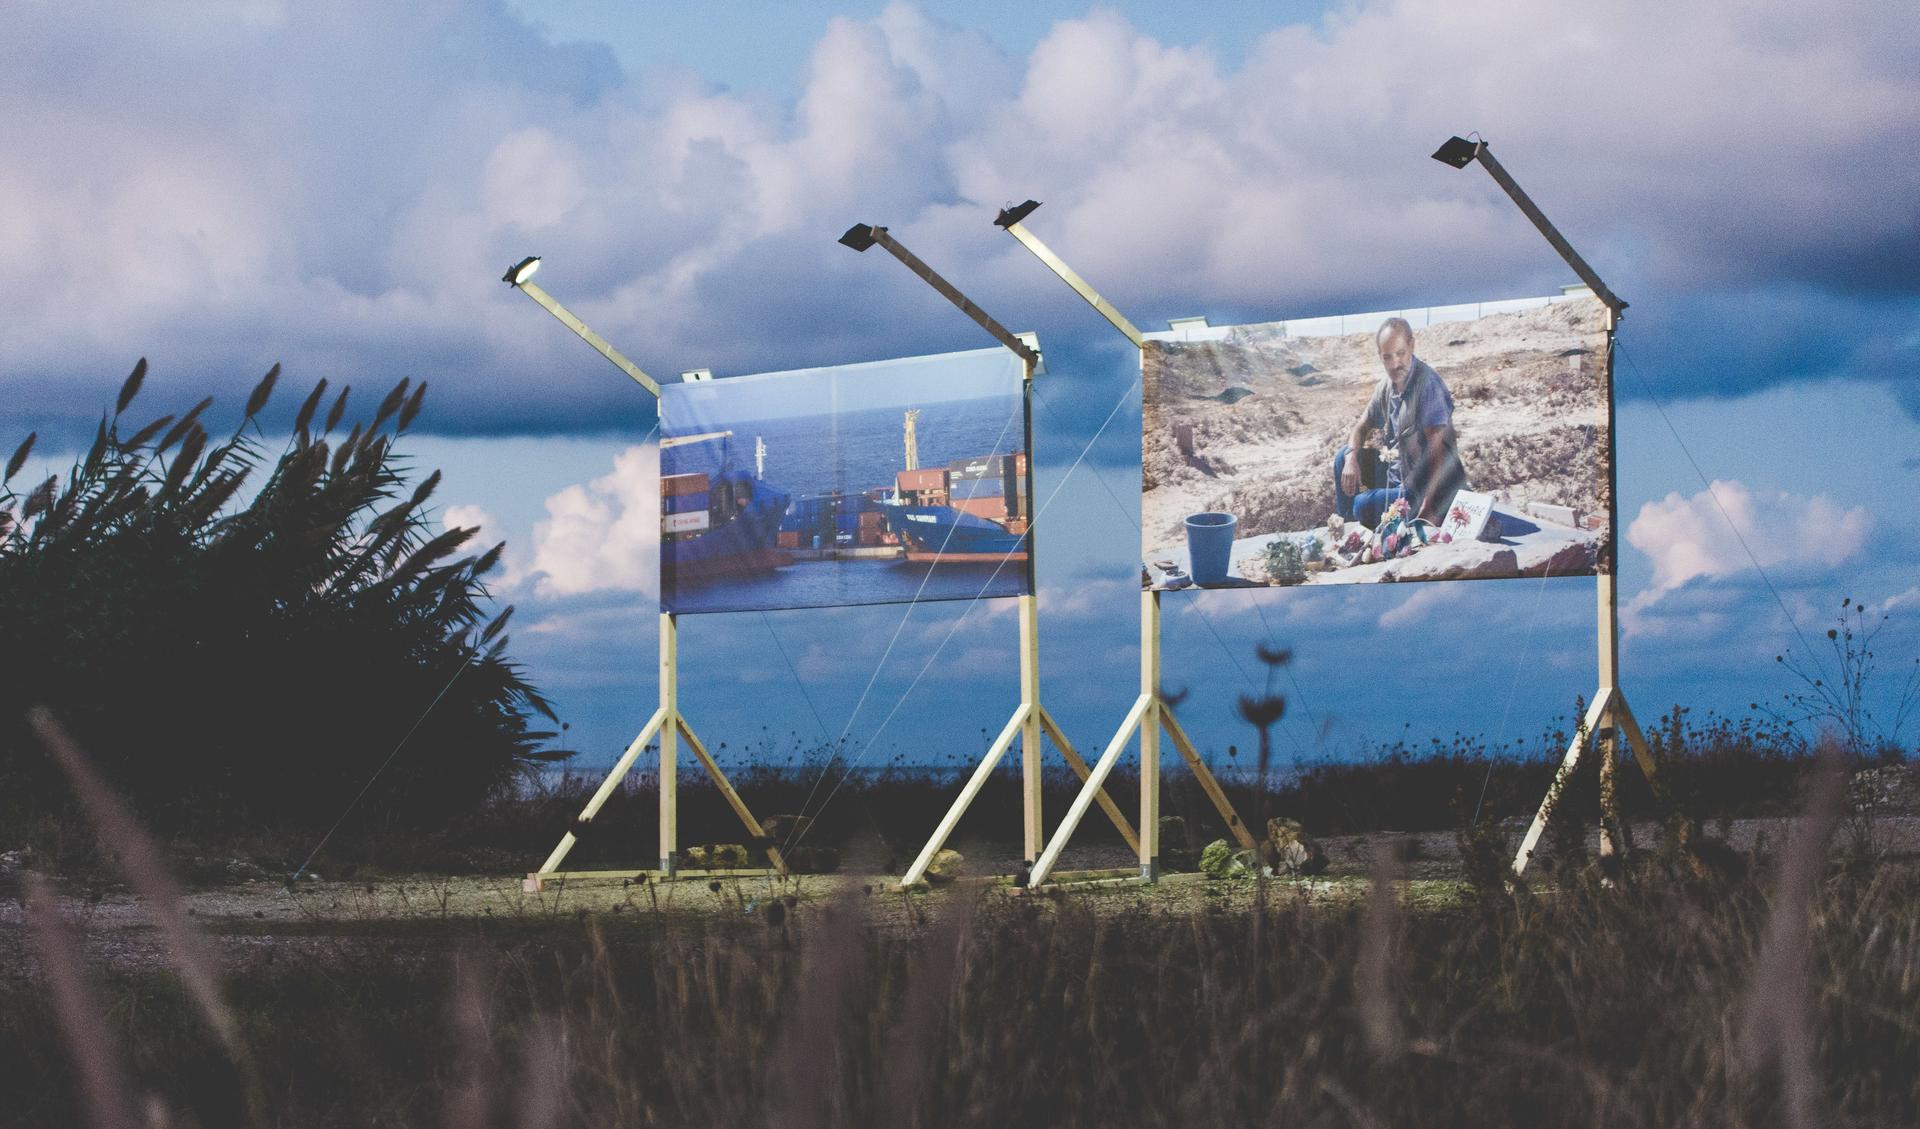 Two big billboaards are displaying pictures of a harbour and a person sitting in a rocky landscape